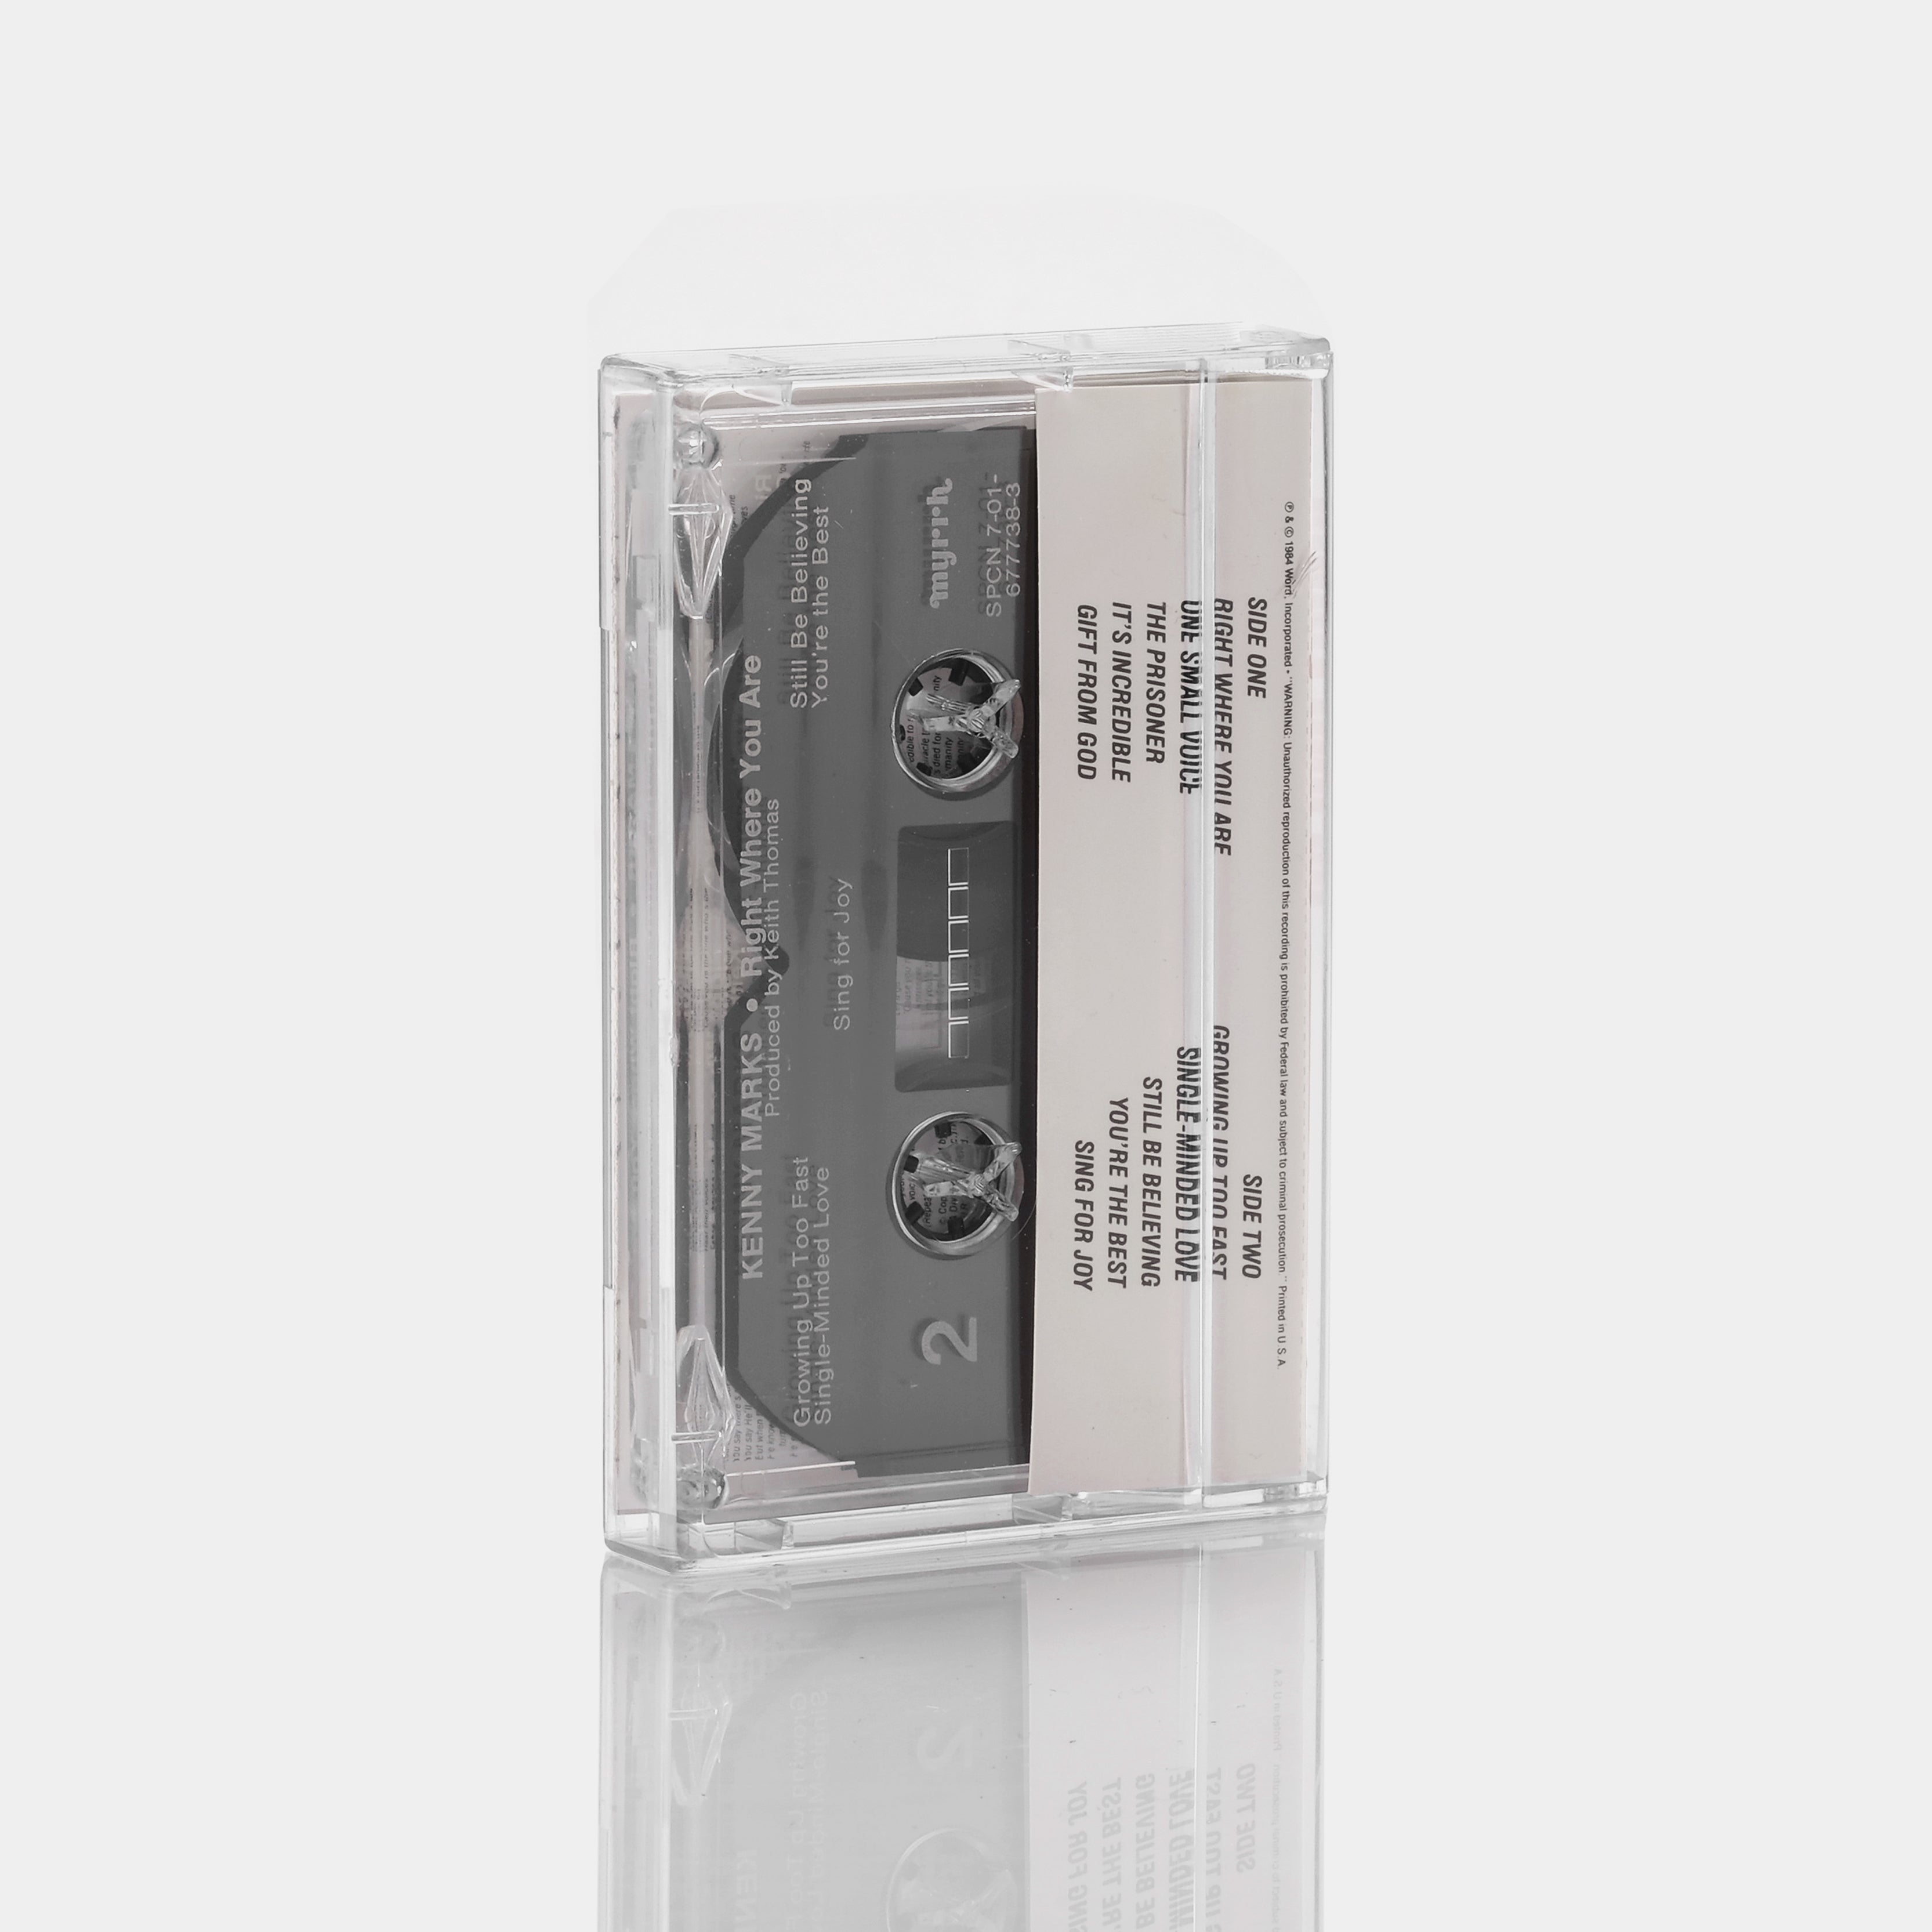 Kenny Marks - Right Where You Are Cassette Tape